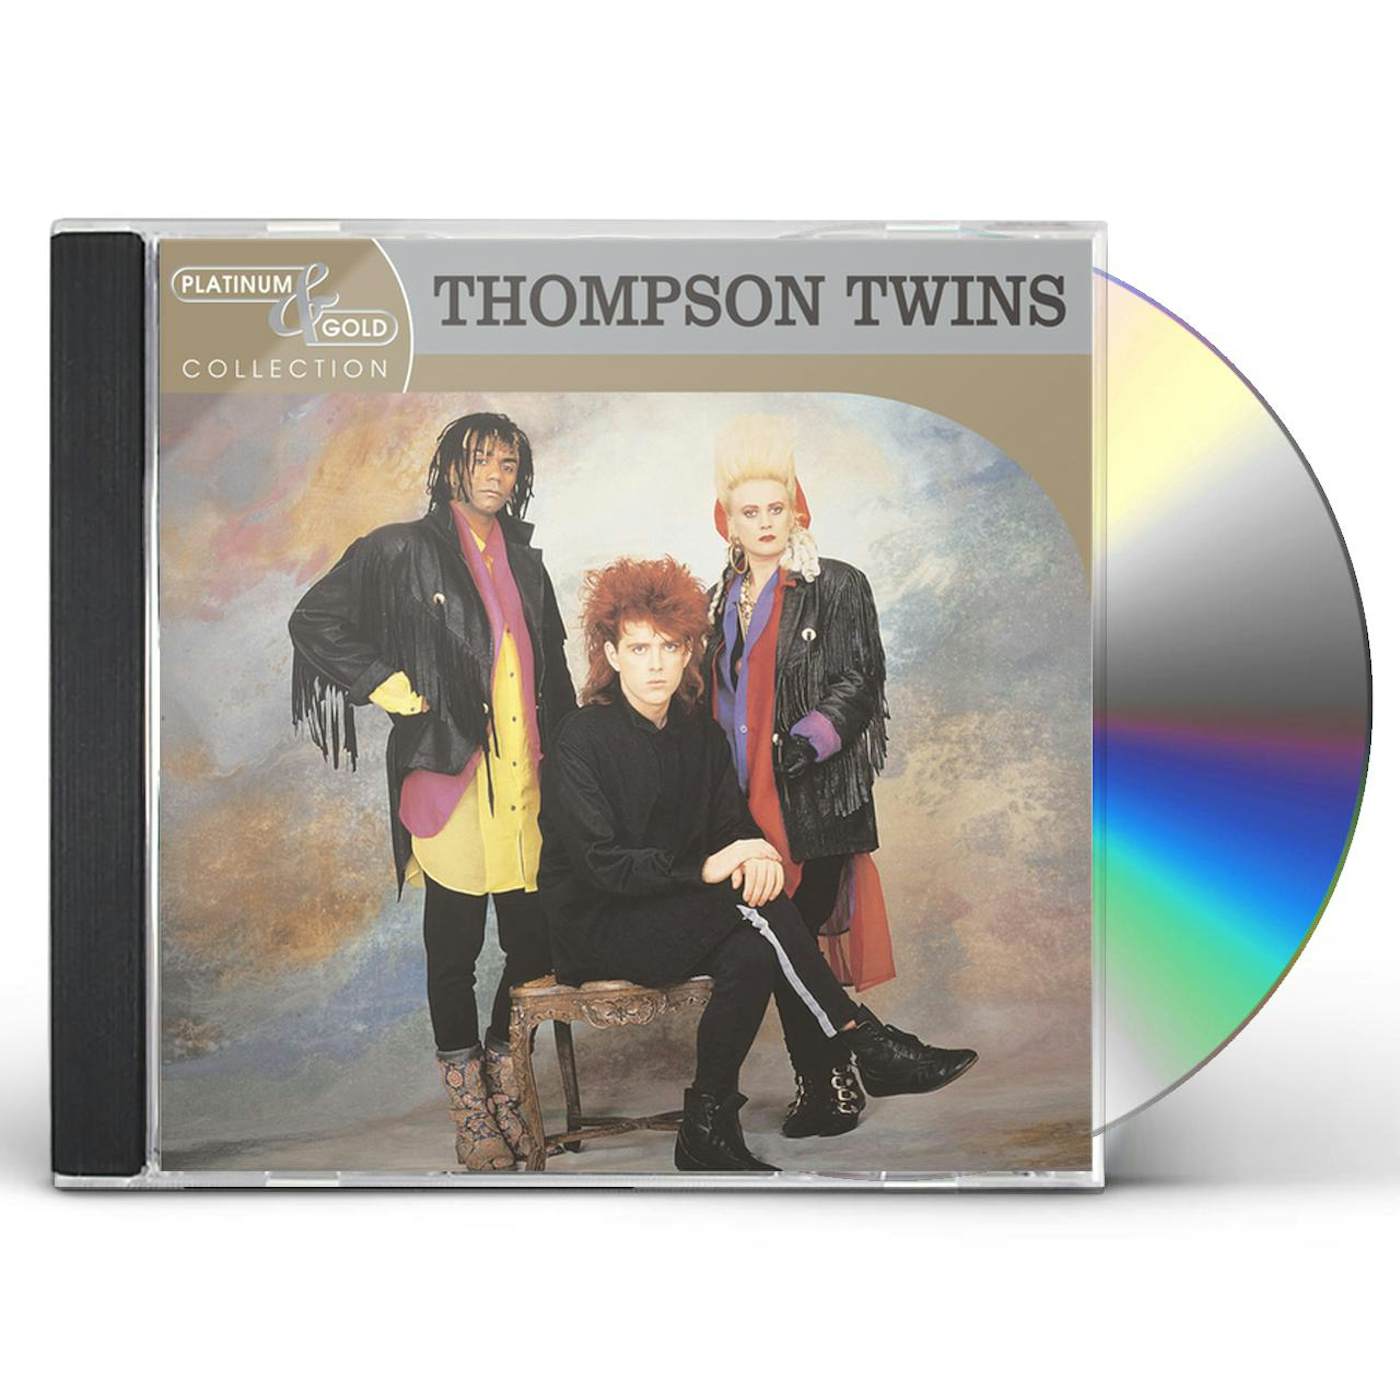 Thompson Twins PLATINUM & GOLD COLLECTION CD